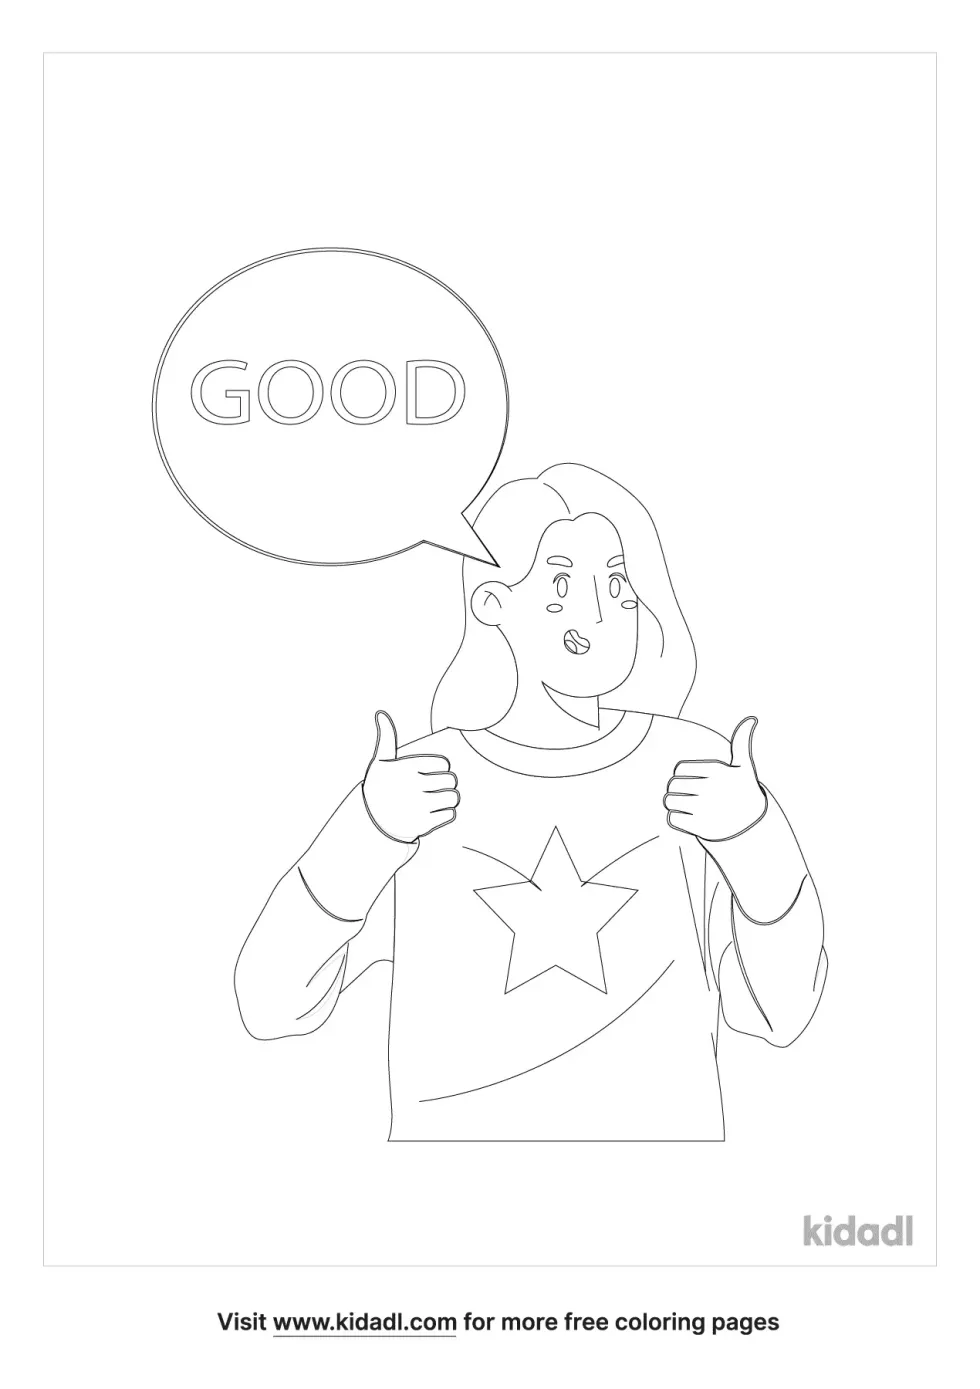 Good Coloring Page